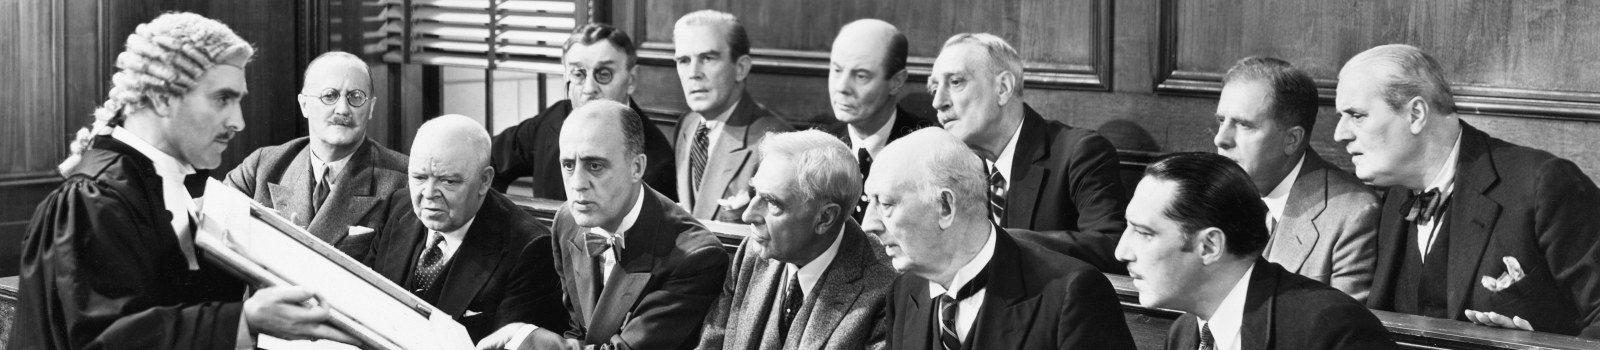 black and white photo of a jury